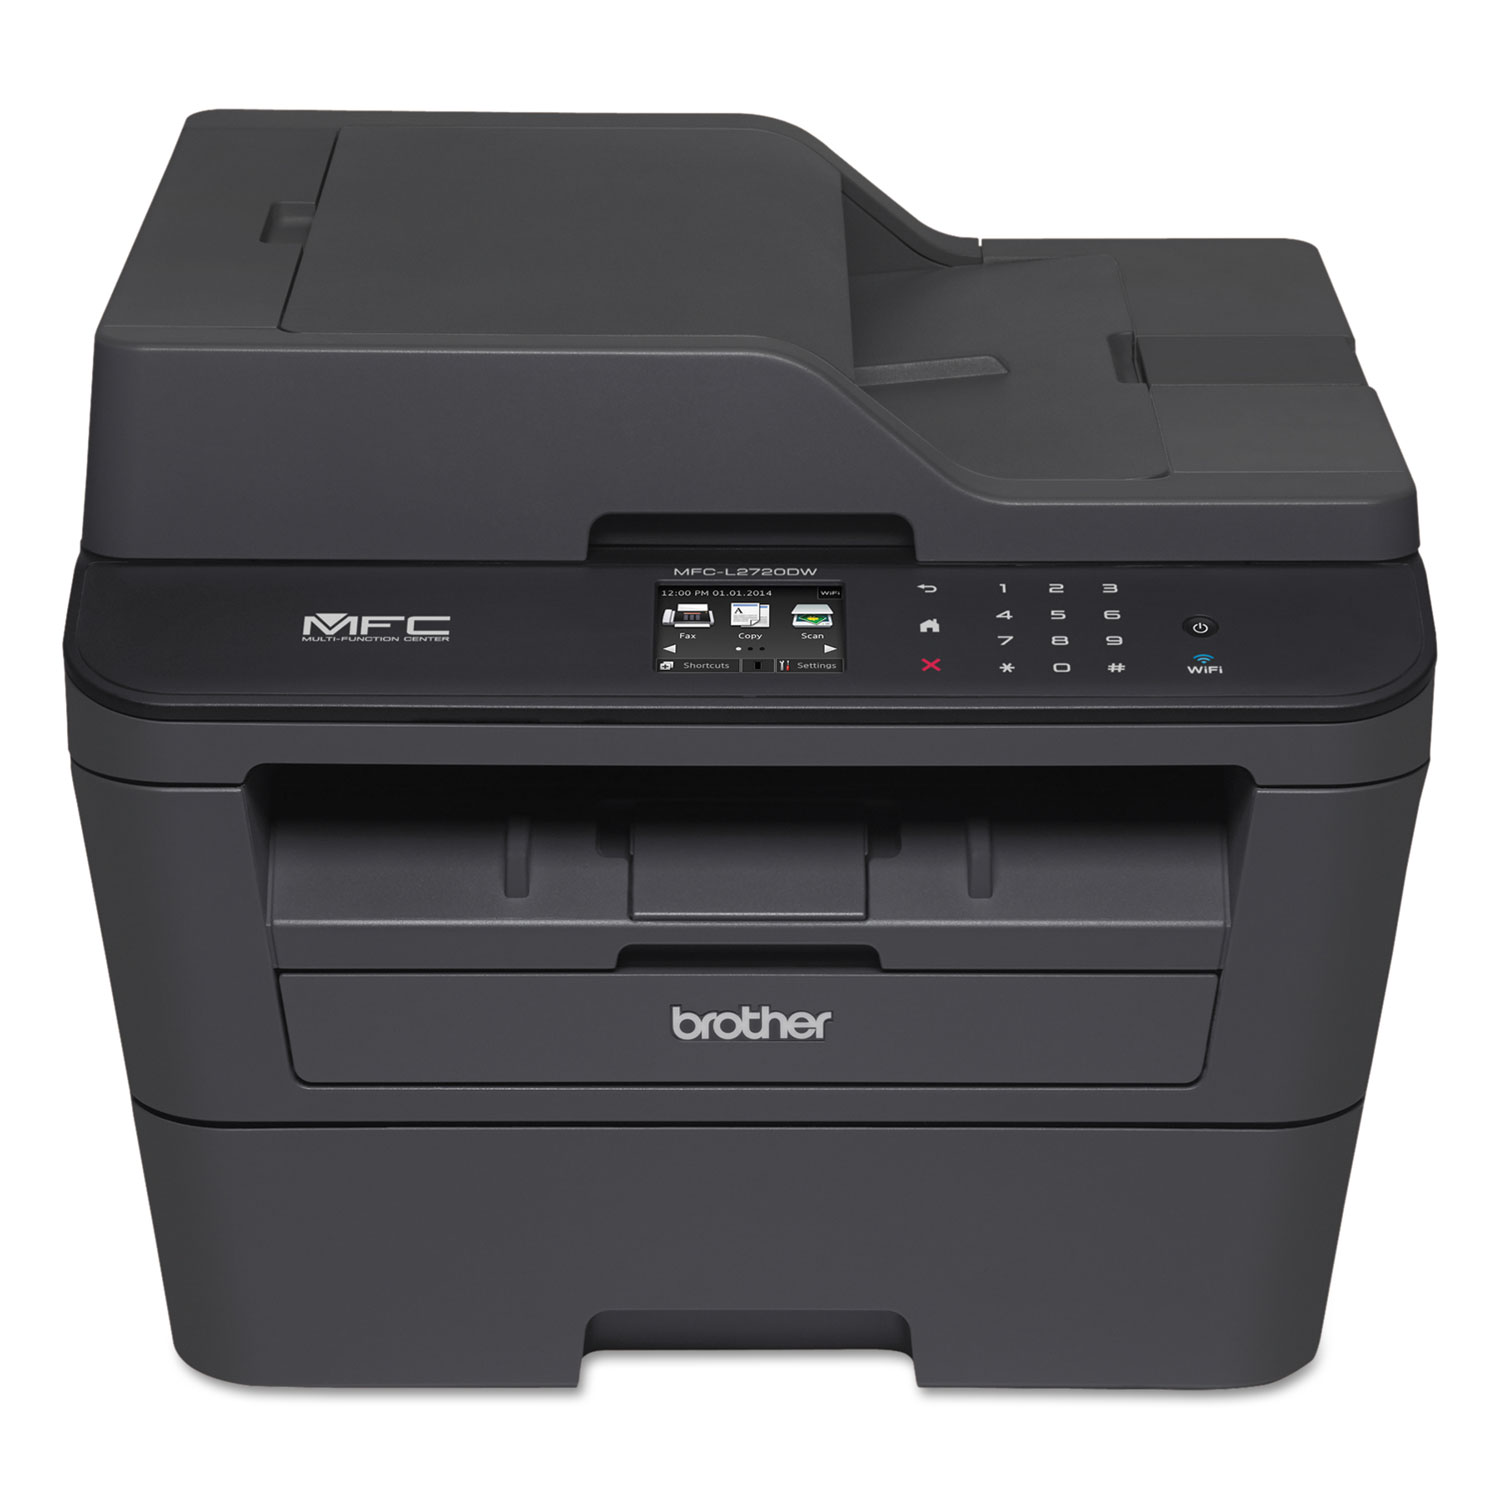  Brother MFCL2720DW MFCL2720DW Compact Laser All-in-One with Wireless Networking and Duplex Printing (BRTMFCL2720DW) 